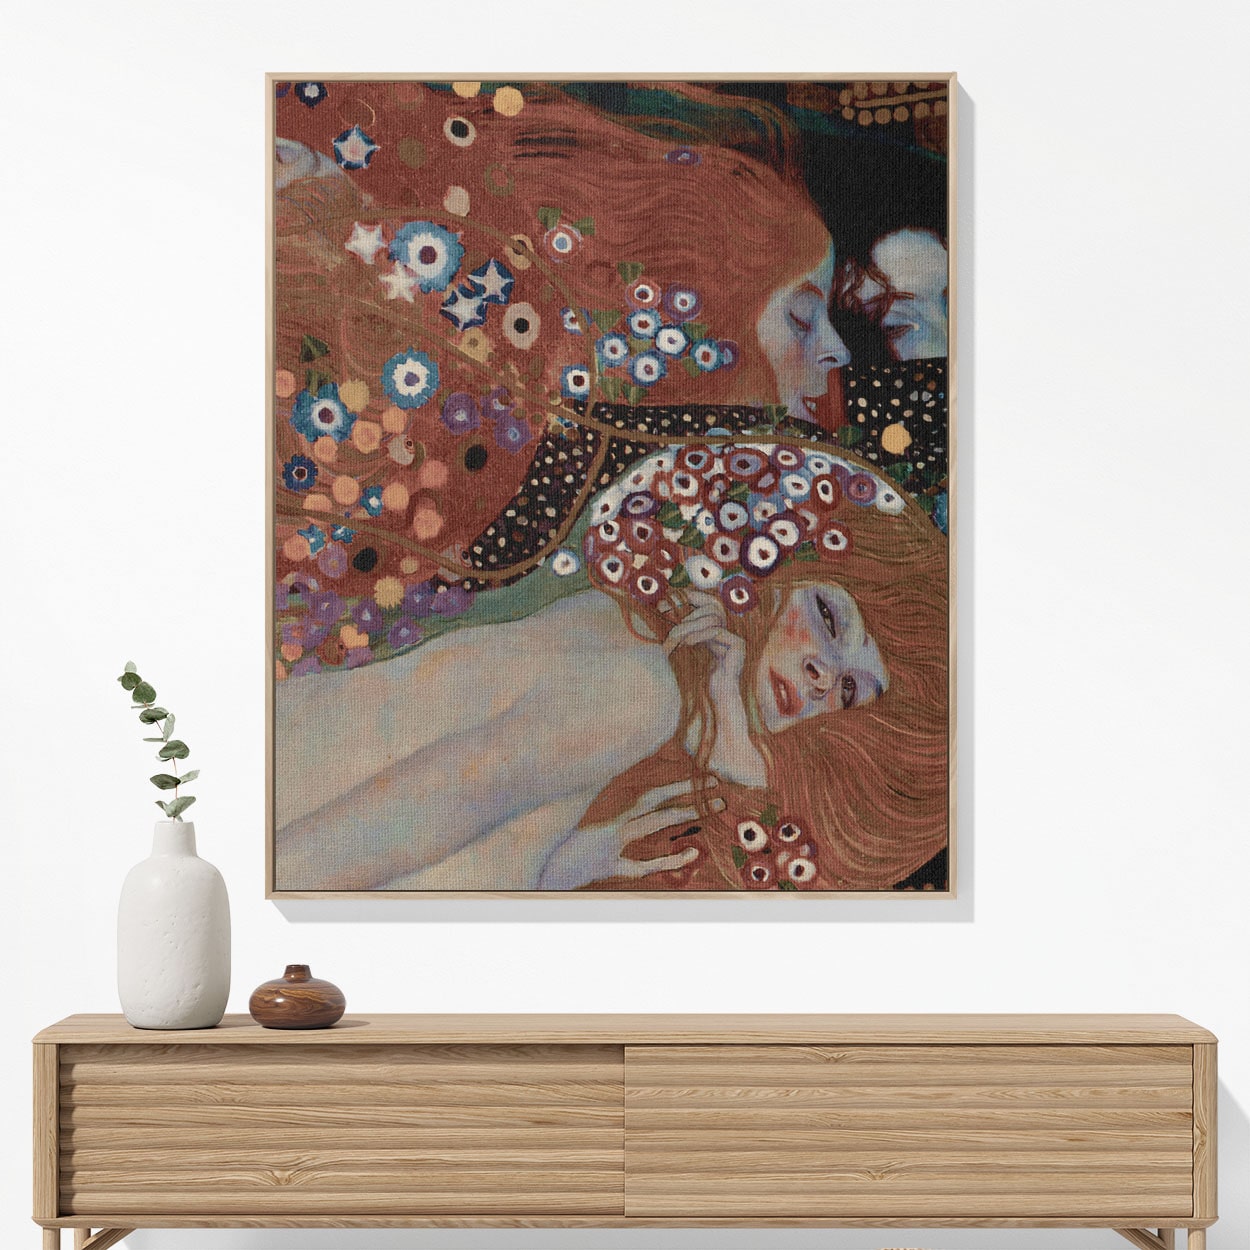 Abstract Women and Flowers Woven Blanket Hanging on a Wall as Framed Wall Art